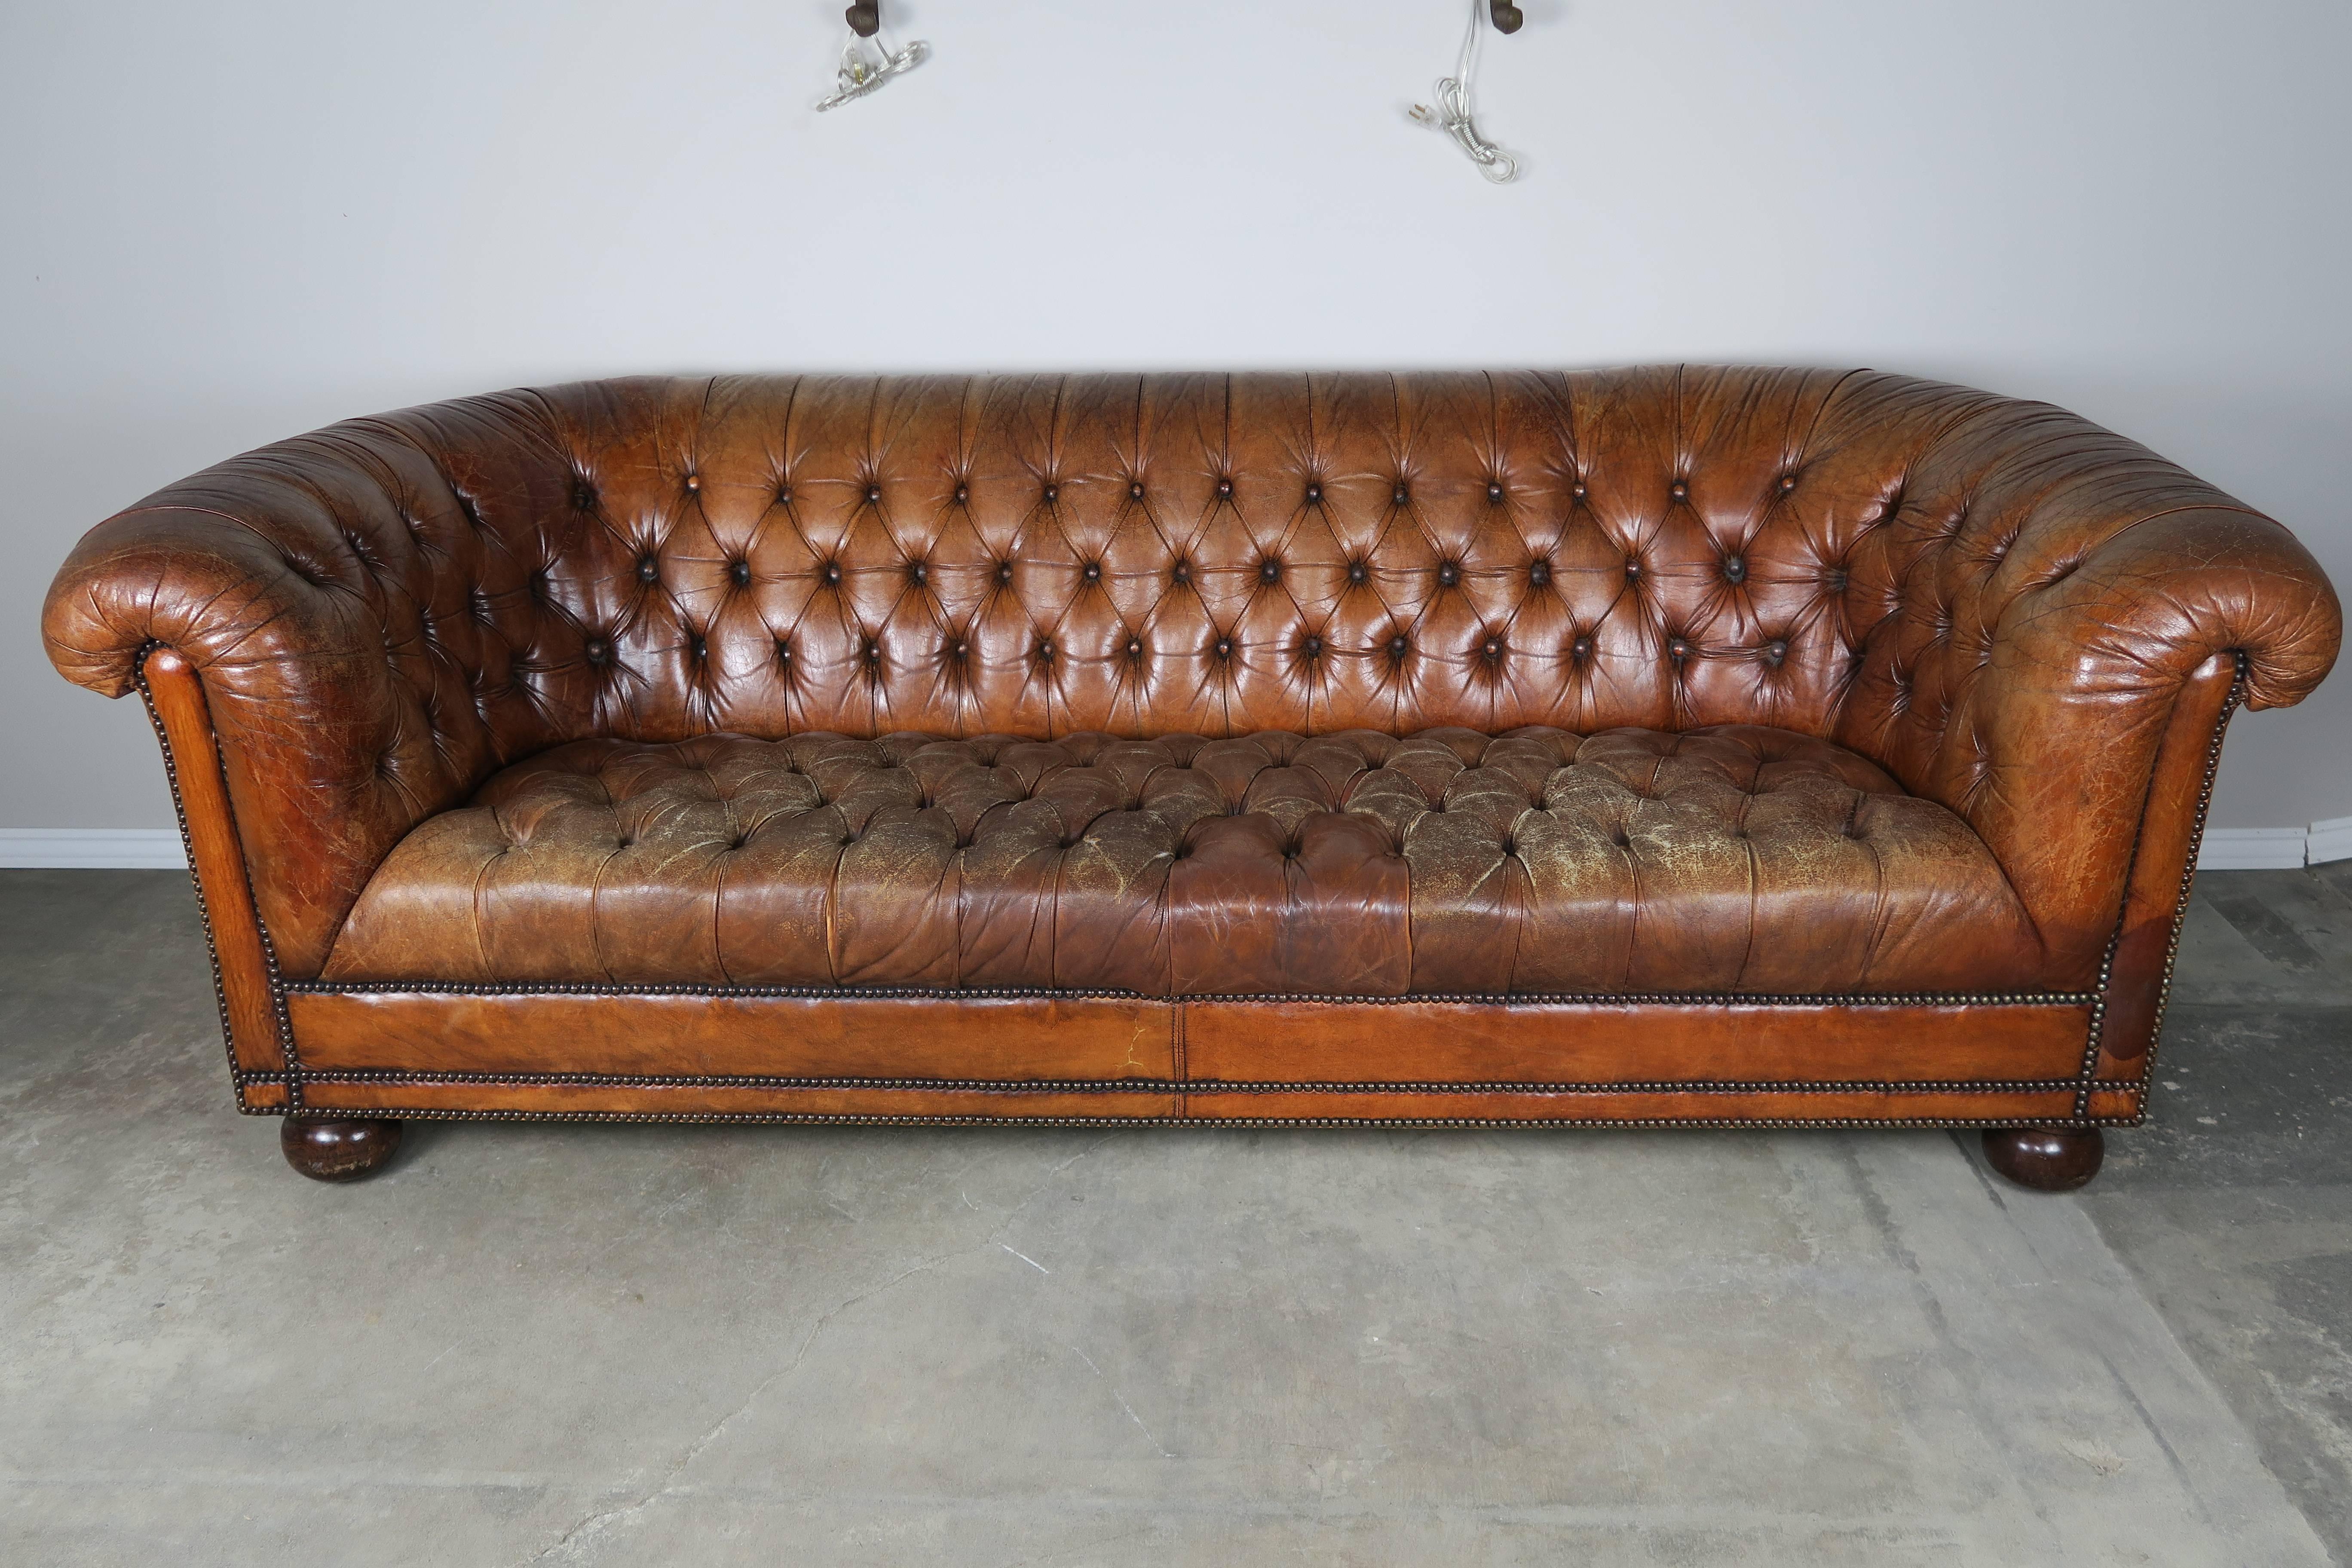 English brown leather tufted Chesterfield style sofa standing on four bun feet with nailhead trim detail. Worn, distressed leather consistent with age and use.